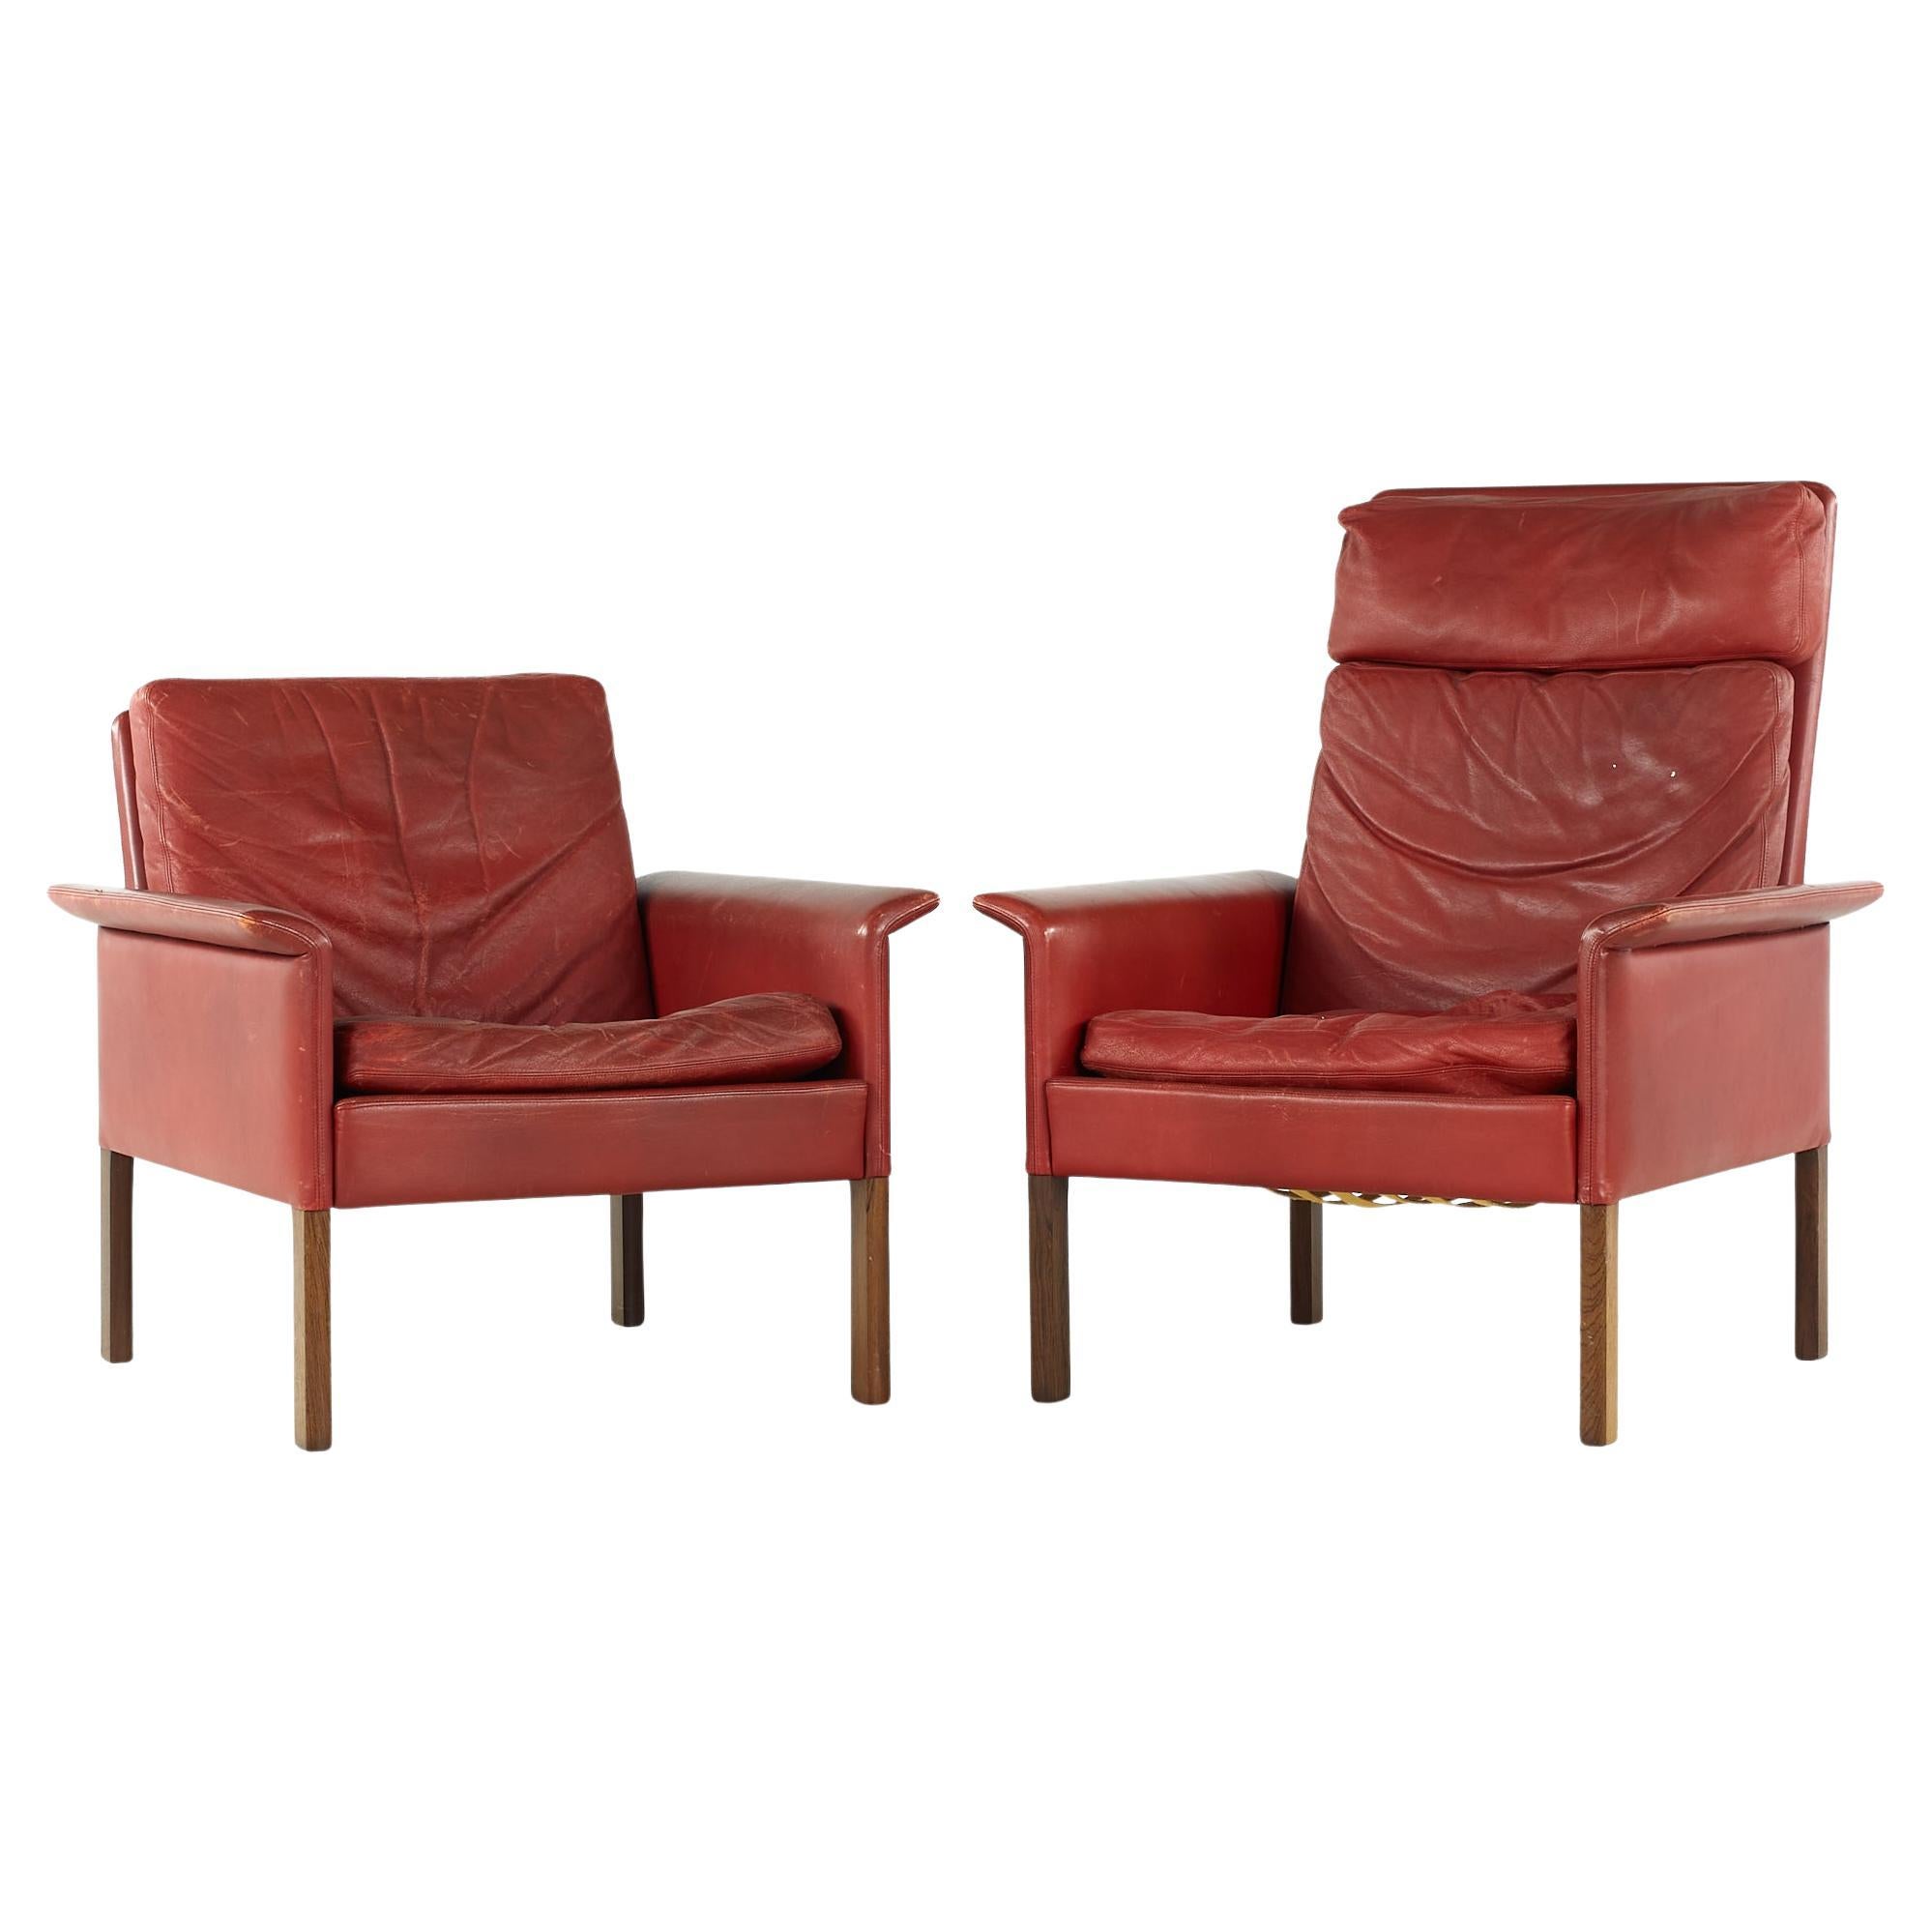 Hans Olsen Midcentury Danish Rosewood and Red Leather Chairs, Pair